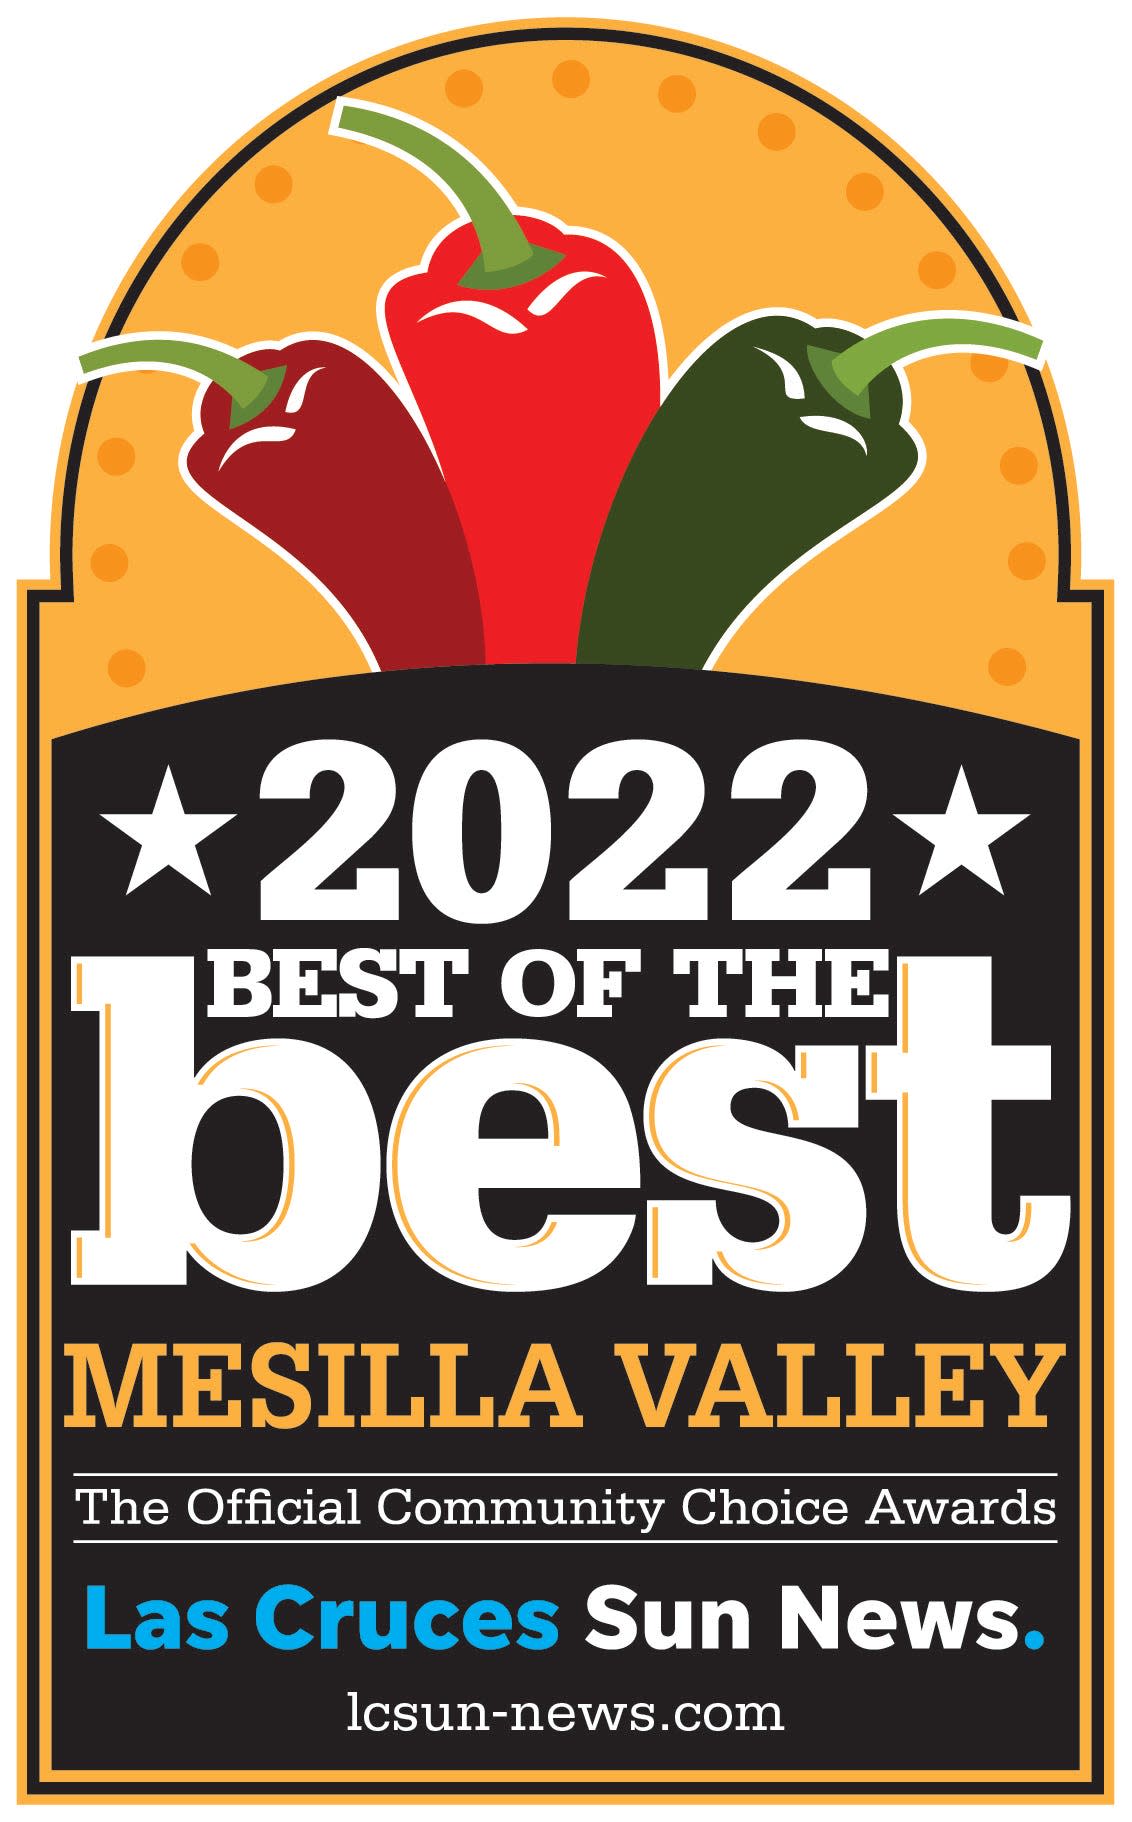 Best of the Mesilla Valley